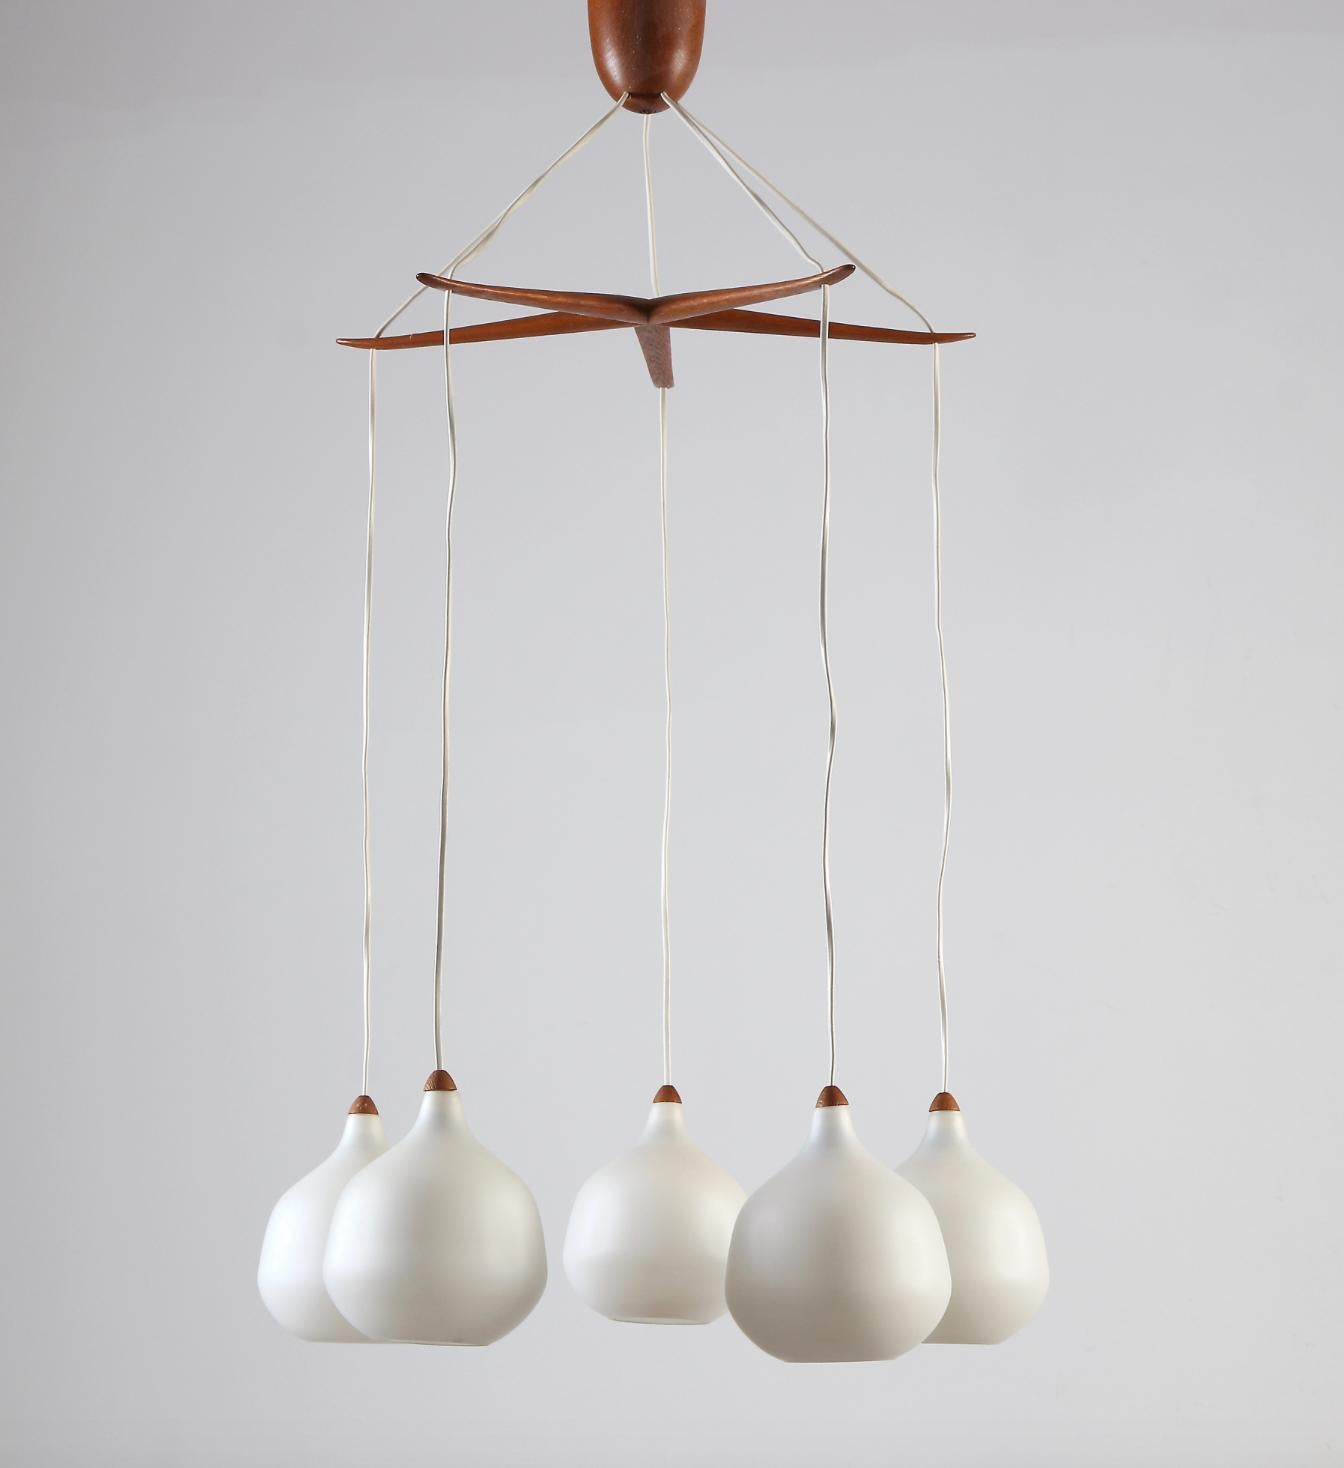 A Lighting pendant by UNO & ÖSTEN KRISTIANSSON.  Wood with shades in opaline glass. Produced by Luxus, Vittsjö. Circa 1950th.
Marked by manufacturer. Existing wires , rewiring available upon request.
Height 42.5″, diameter approx. 24″.